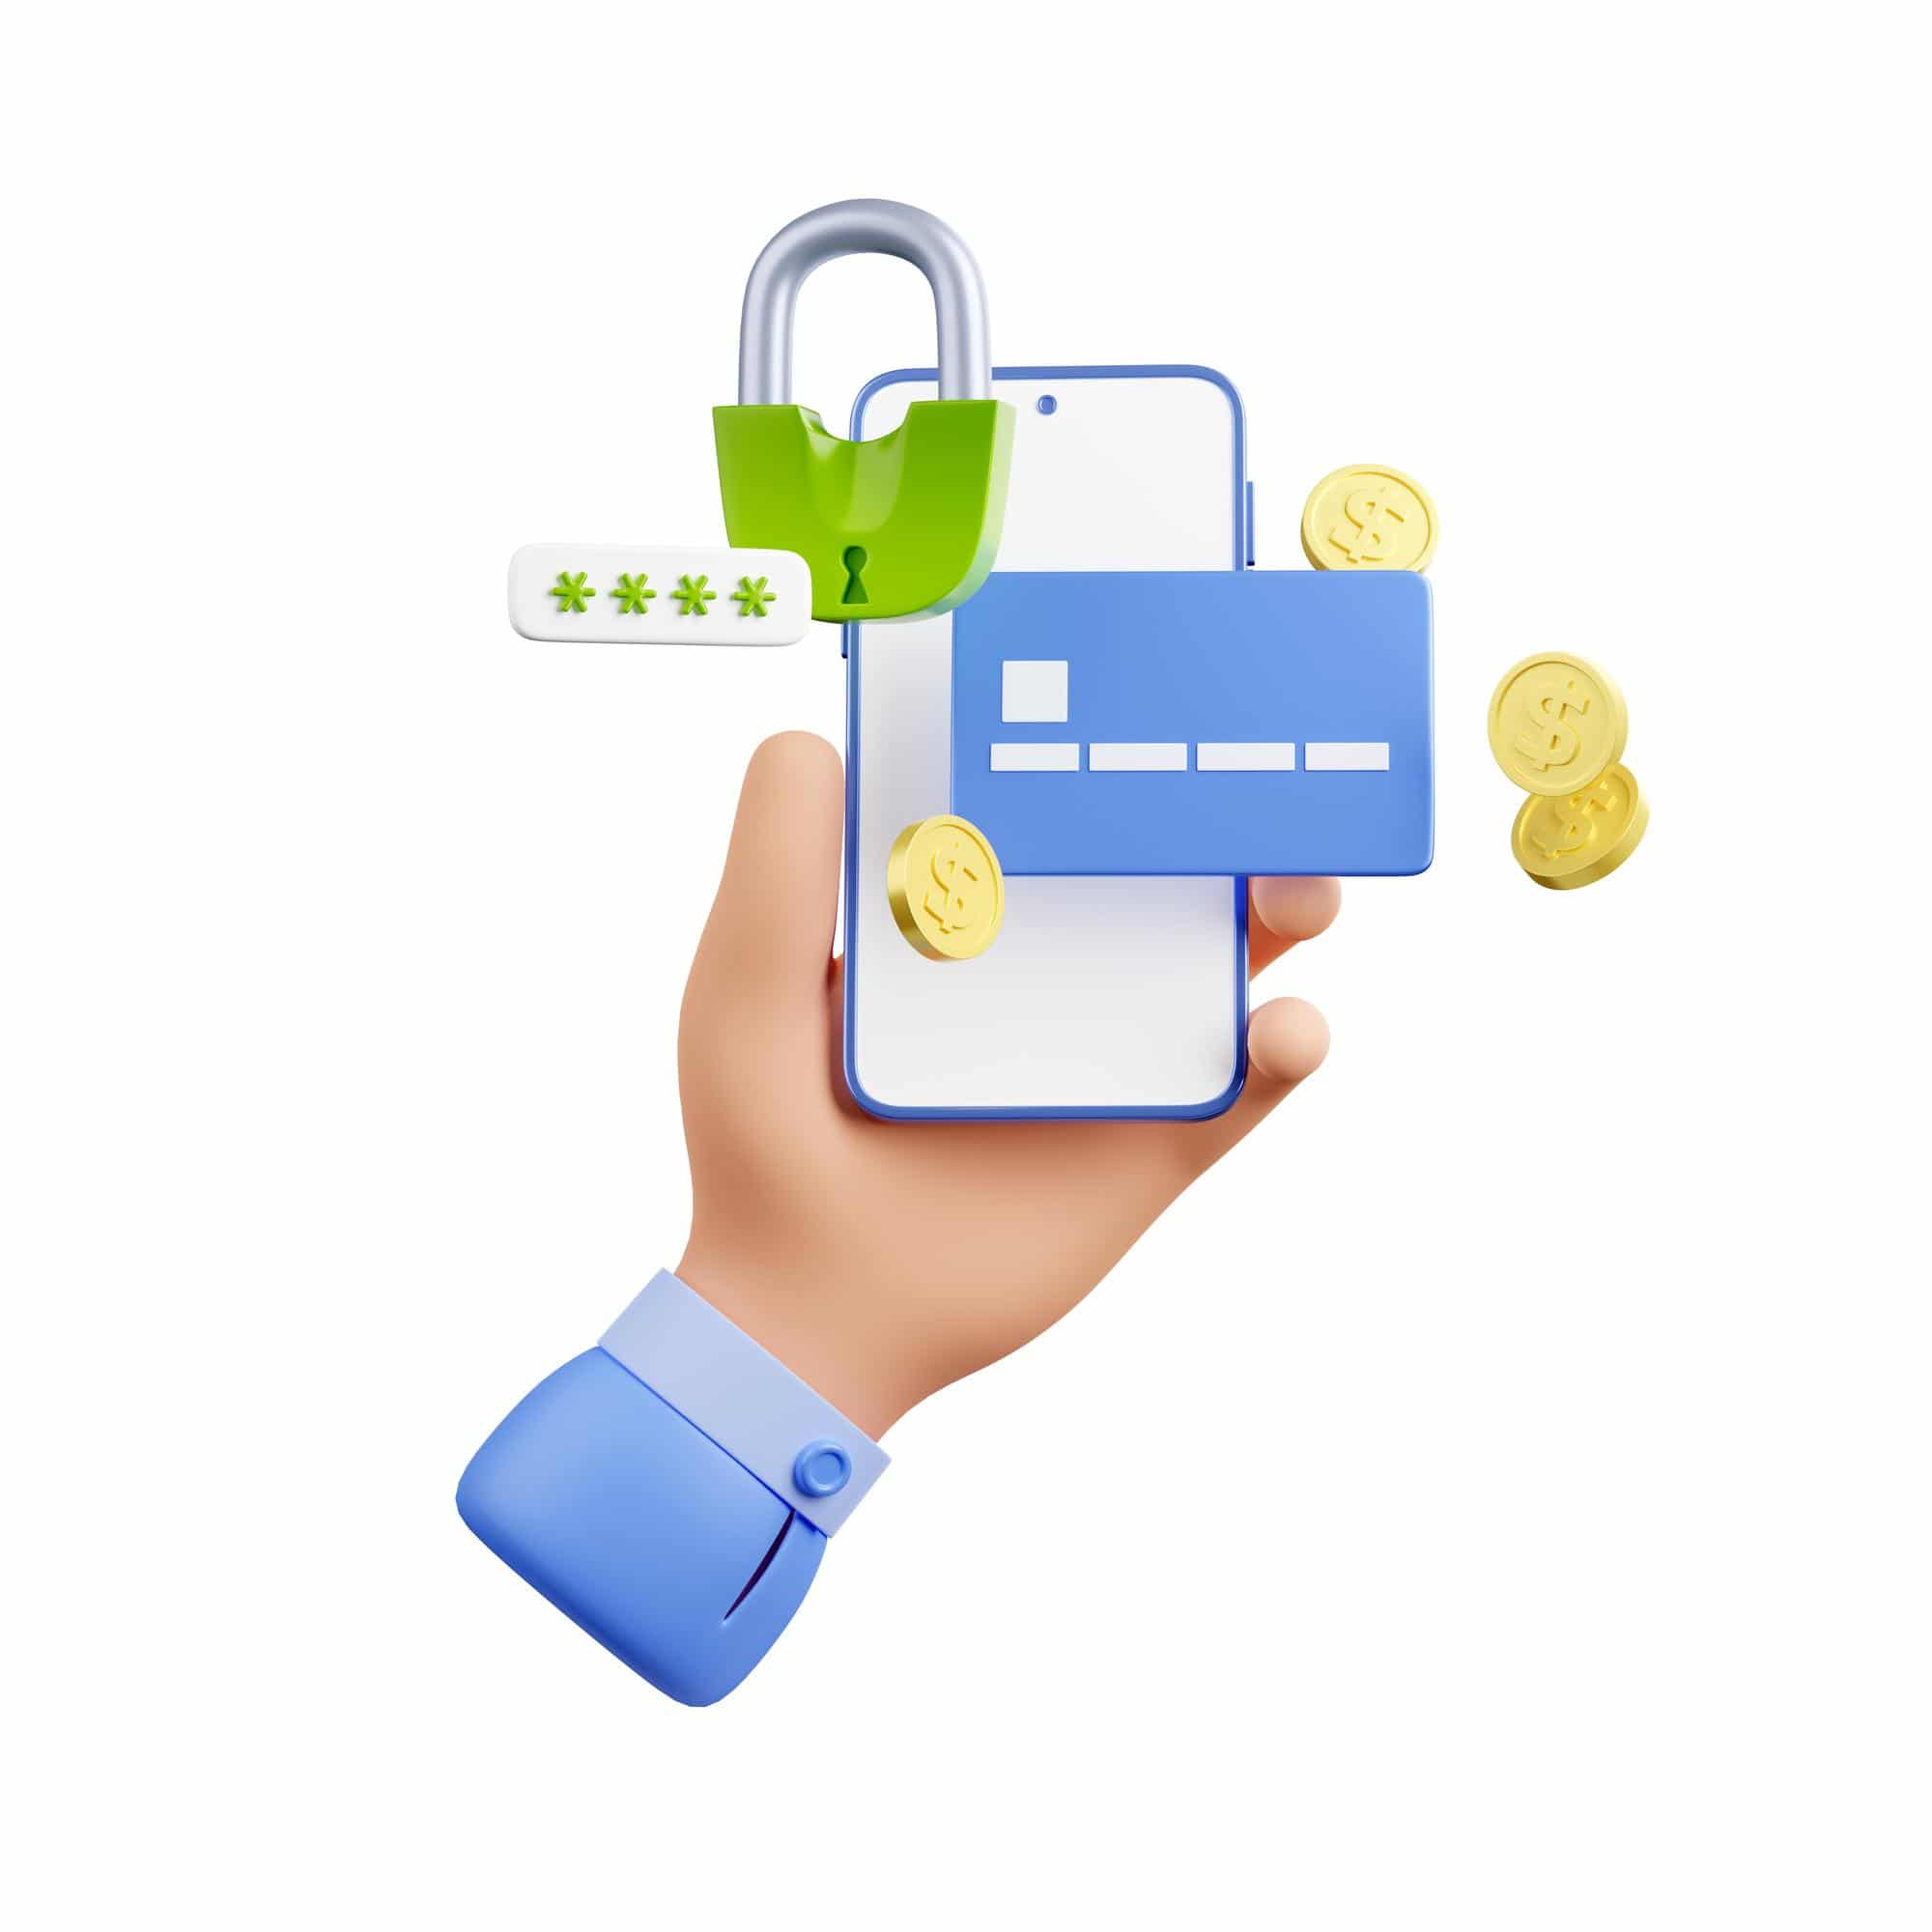 Payment Security Concerns